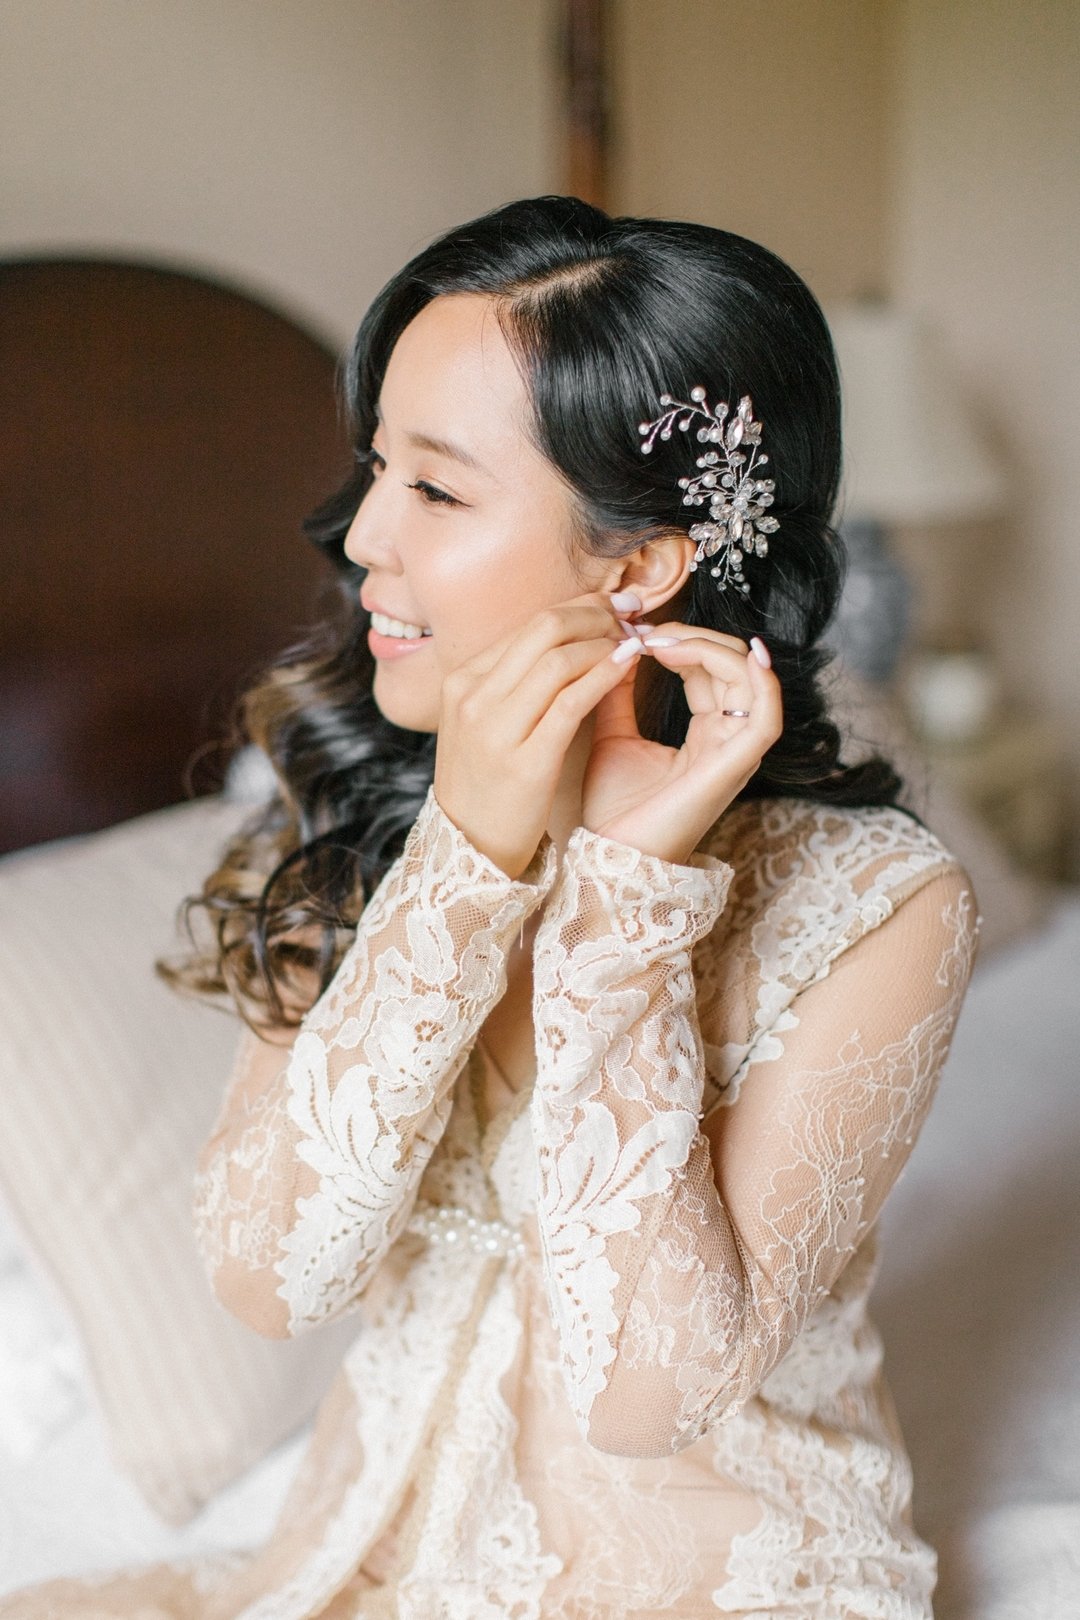 One of the most sought-after bridal hairstyles ✨
⁠
This look is perfect for brides who want to glamorous for their Chateau wedding in France!

PRO TIP: This style looks gorgeous on strapless gowns or gowns with a low neckline 👰

Photography @kateand